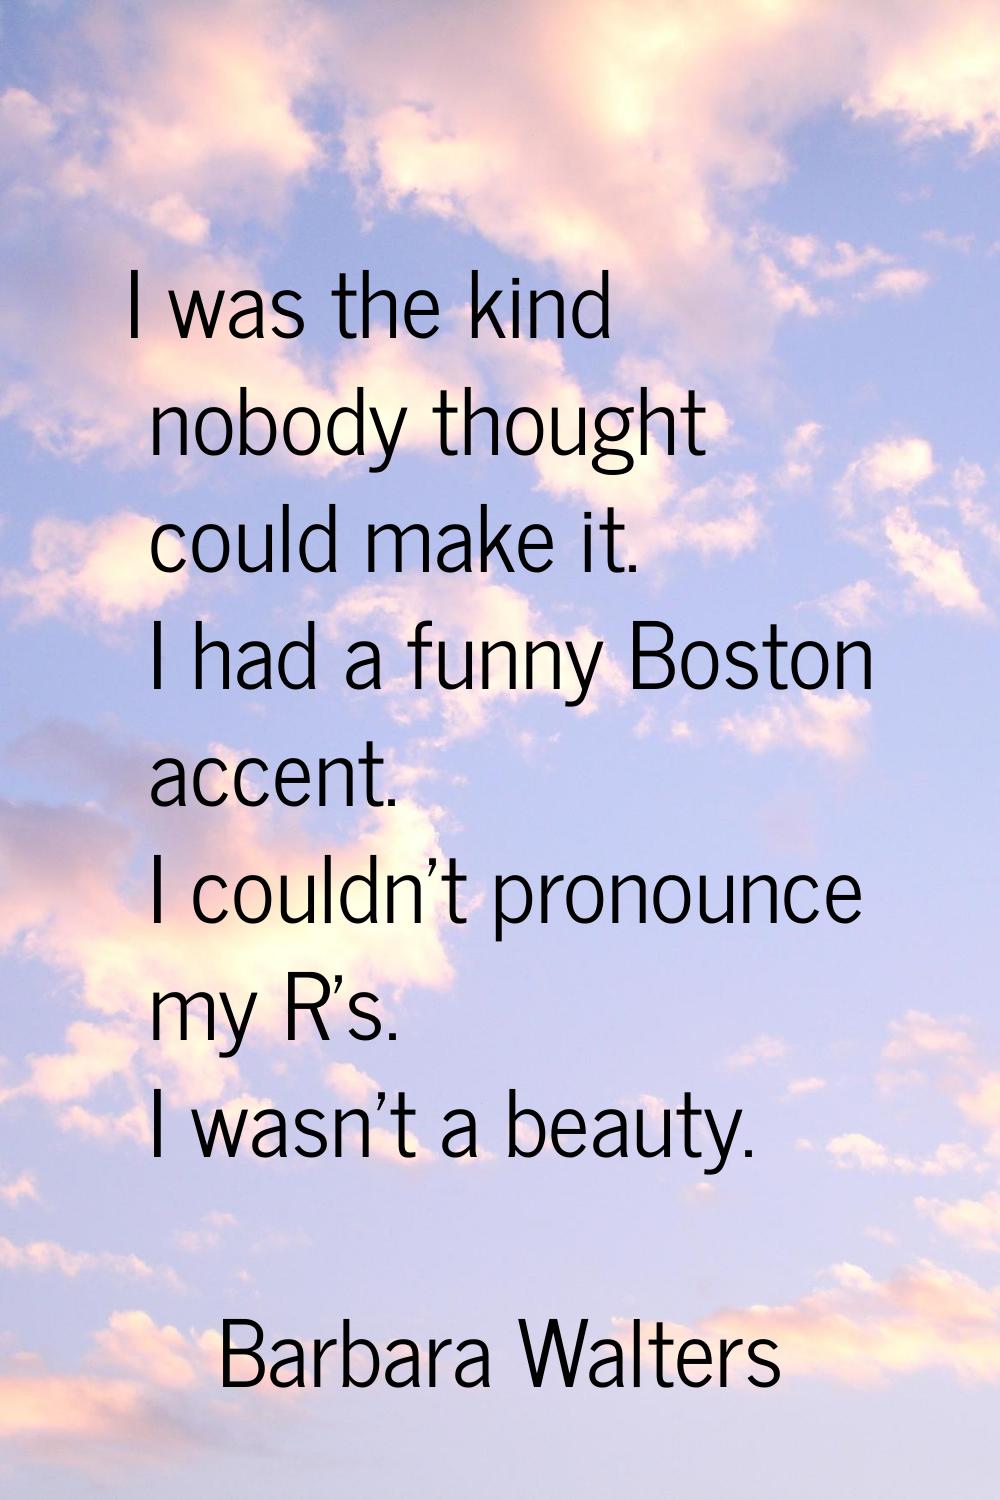 I was the kind nobody thought could make it. I had a funny Boston accent. I couldn't pronounce my R